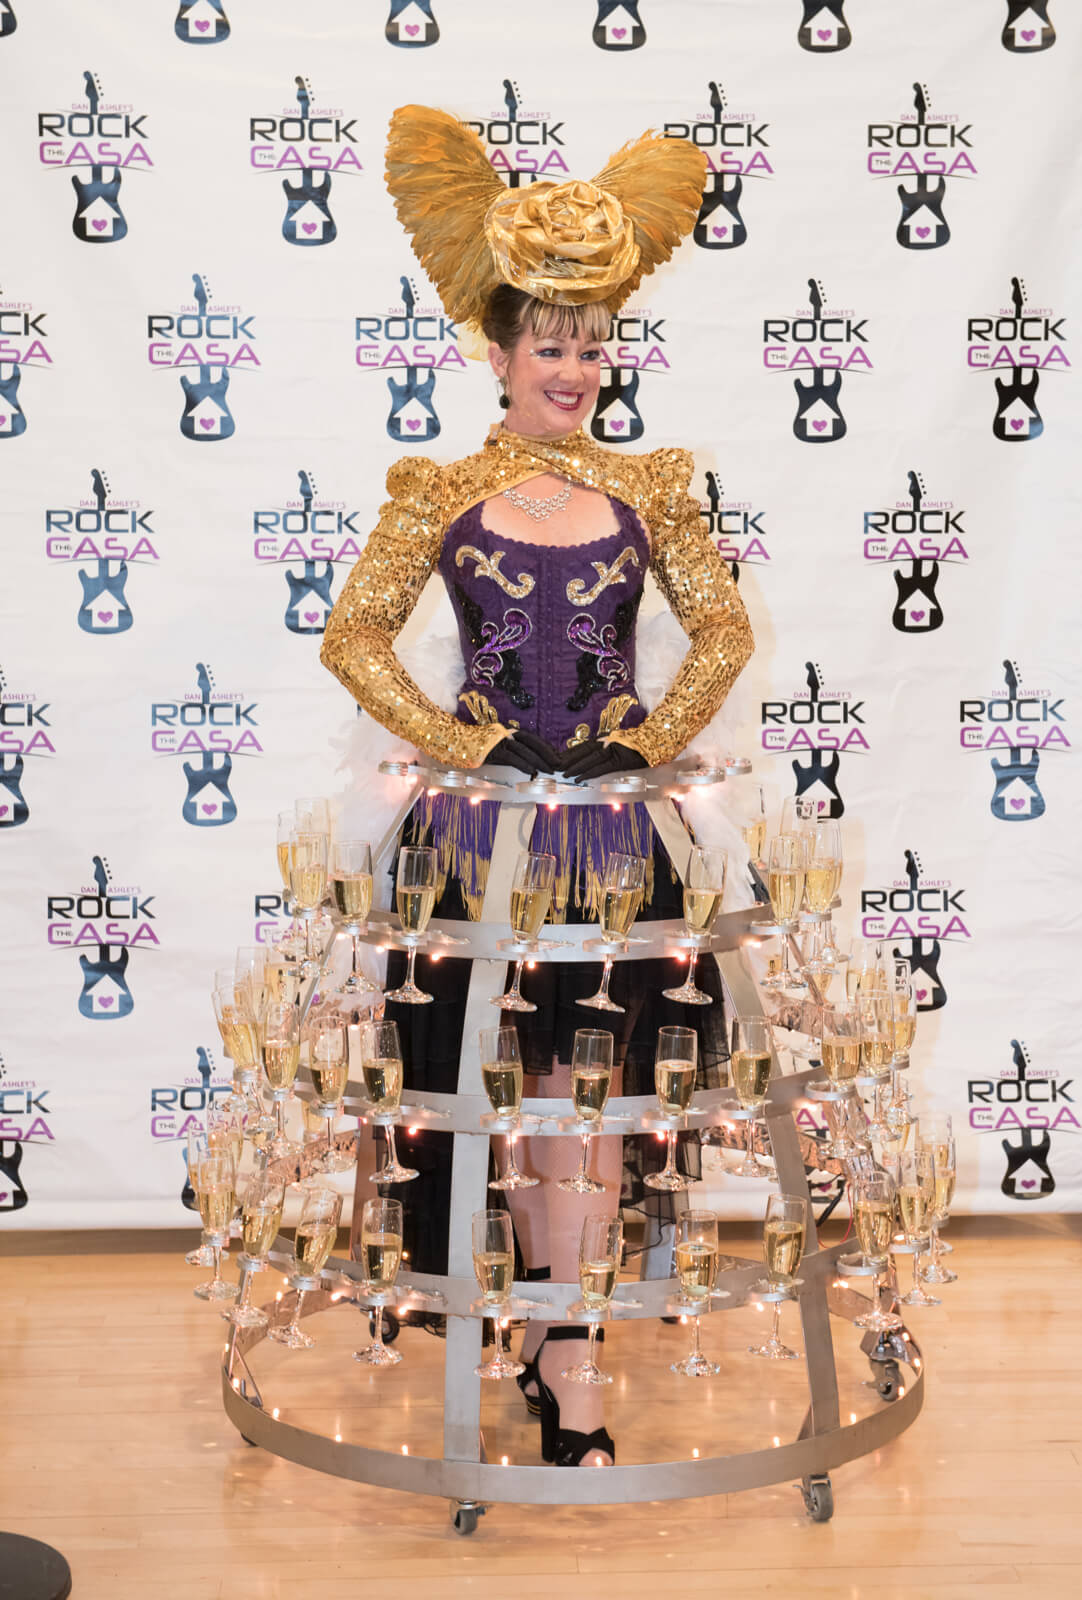 Woman at event dressed in dress made of champagne glasses